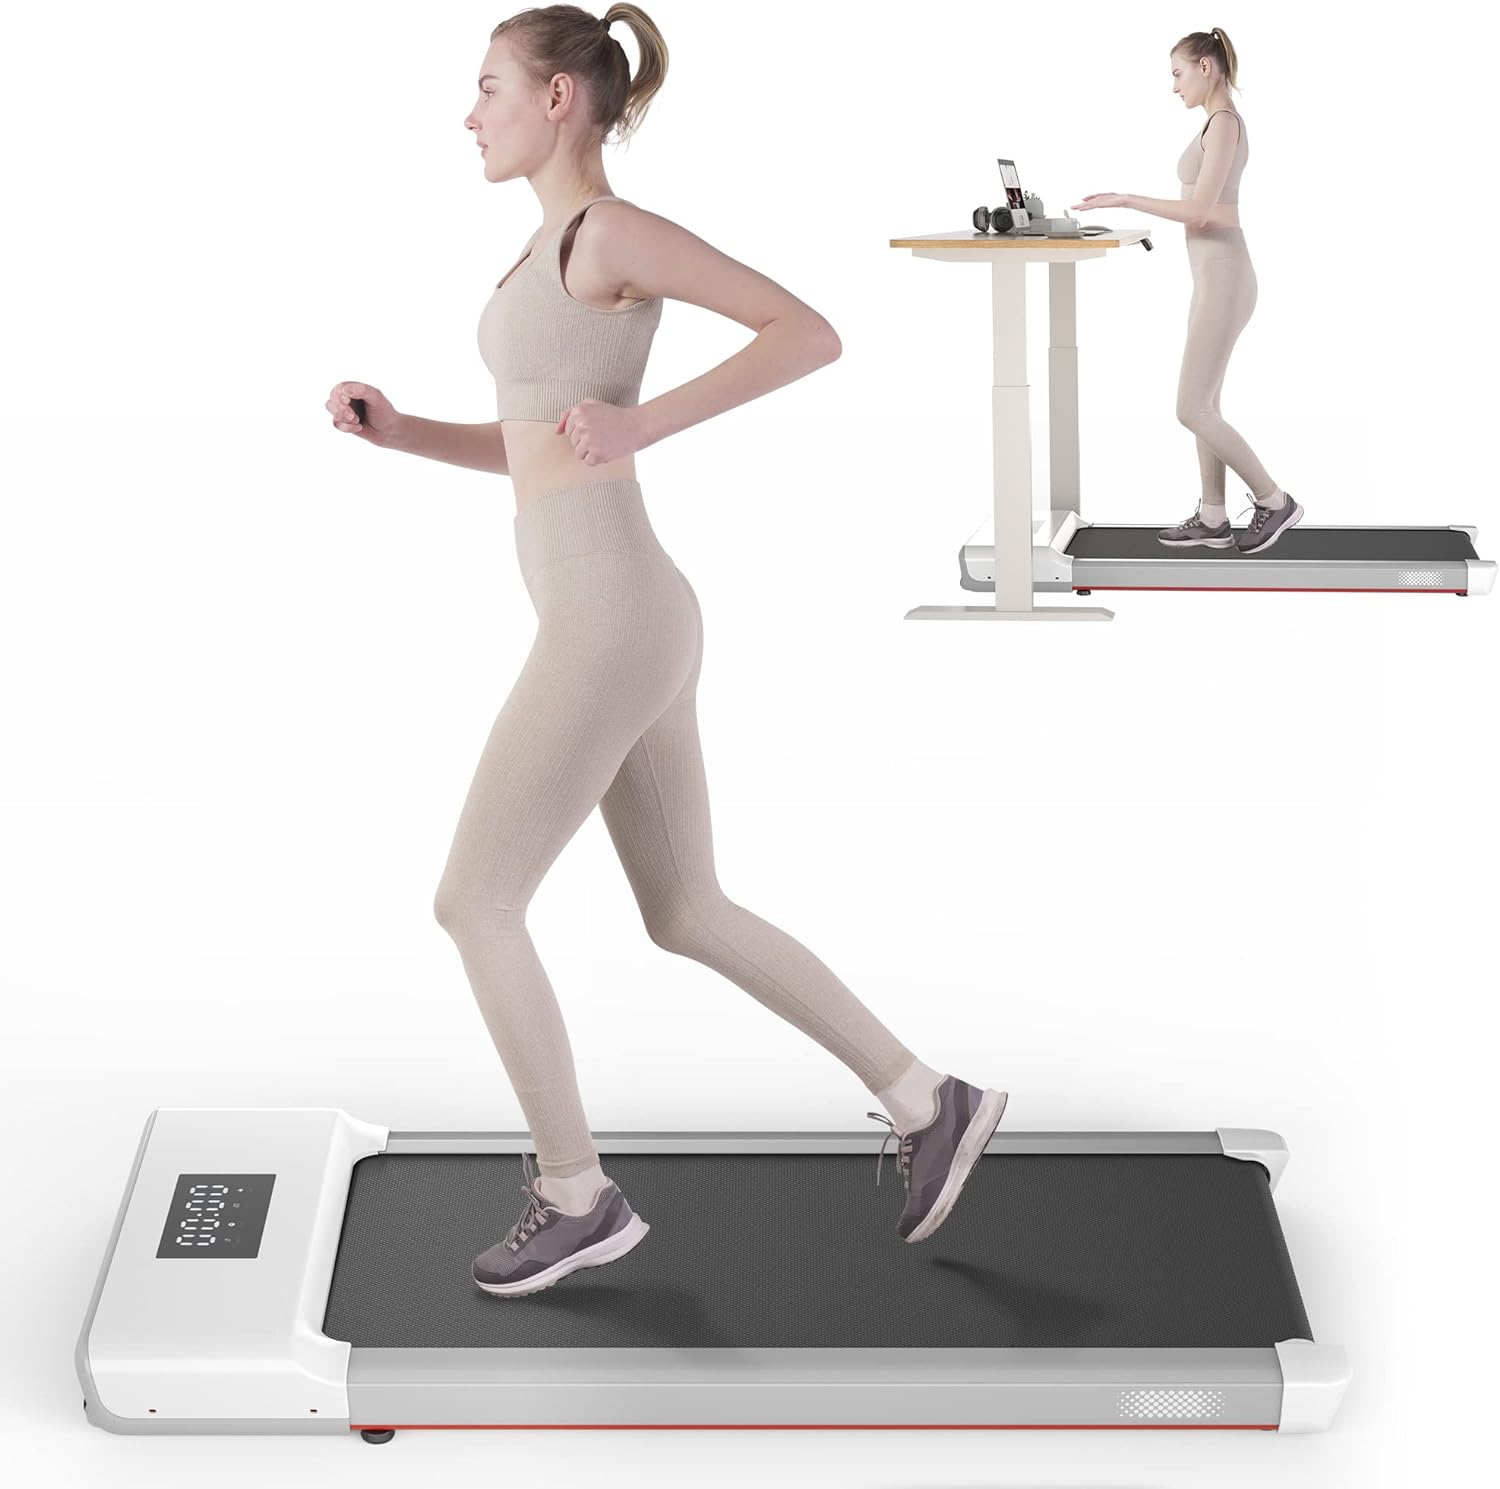 SSPHPPLIE Walking Pad 300lb, 40*16 Walking Area Under Desk Treadmillwith Remote Control ,2 in 1 Portable Walking Pad Treadmill for Home/Office/Exercise(White) - image 1 of 10